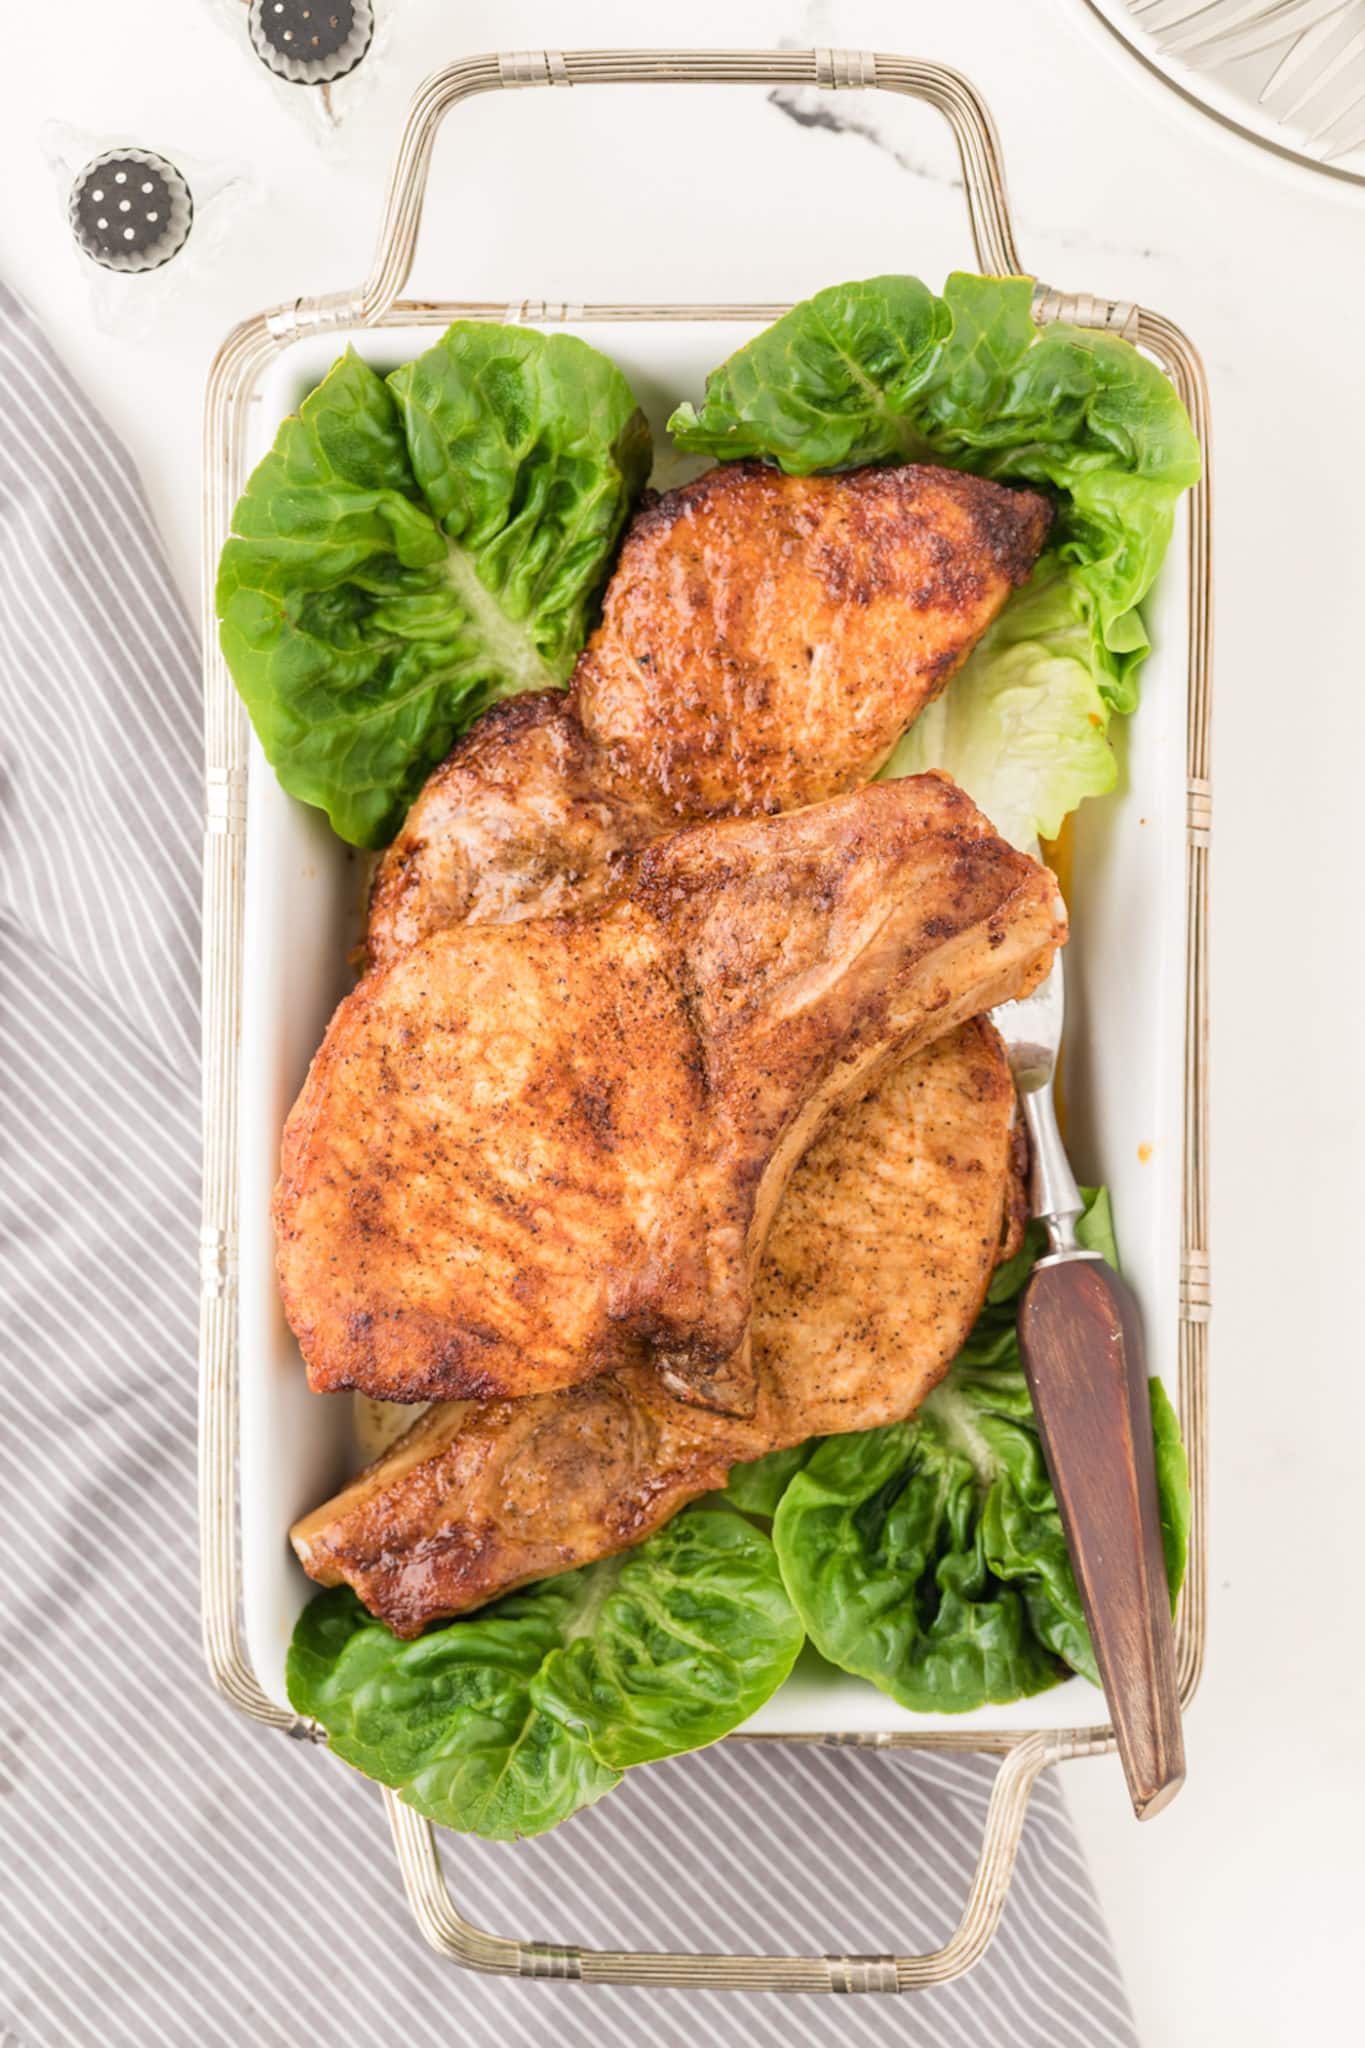 cooked pork chops on a serving dish with lettuce.